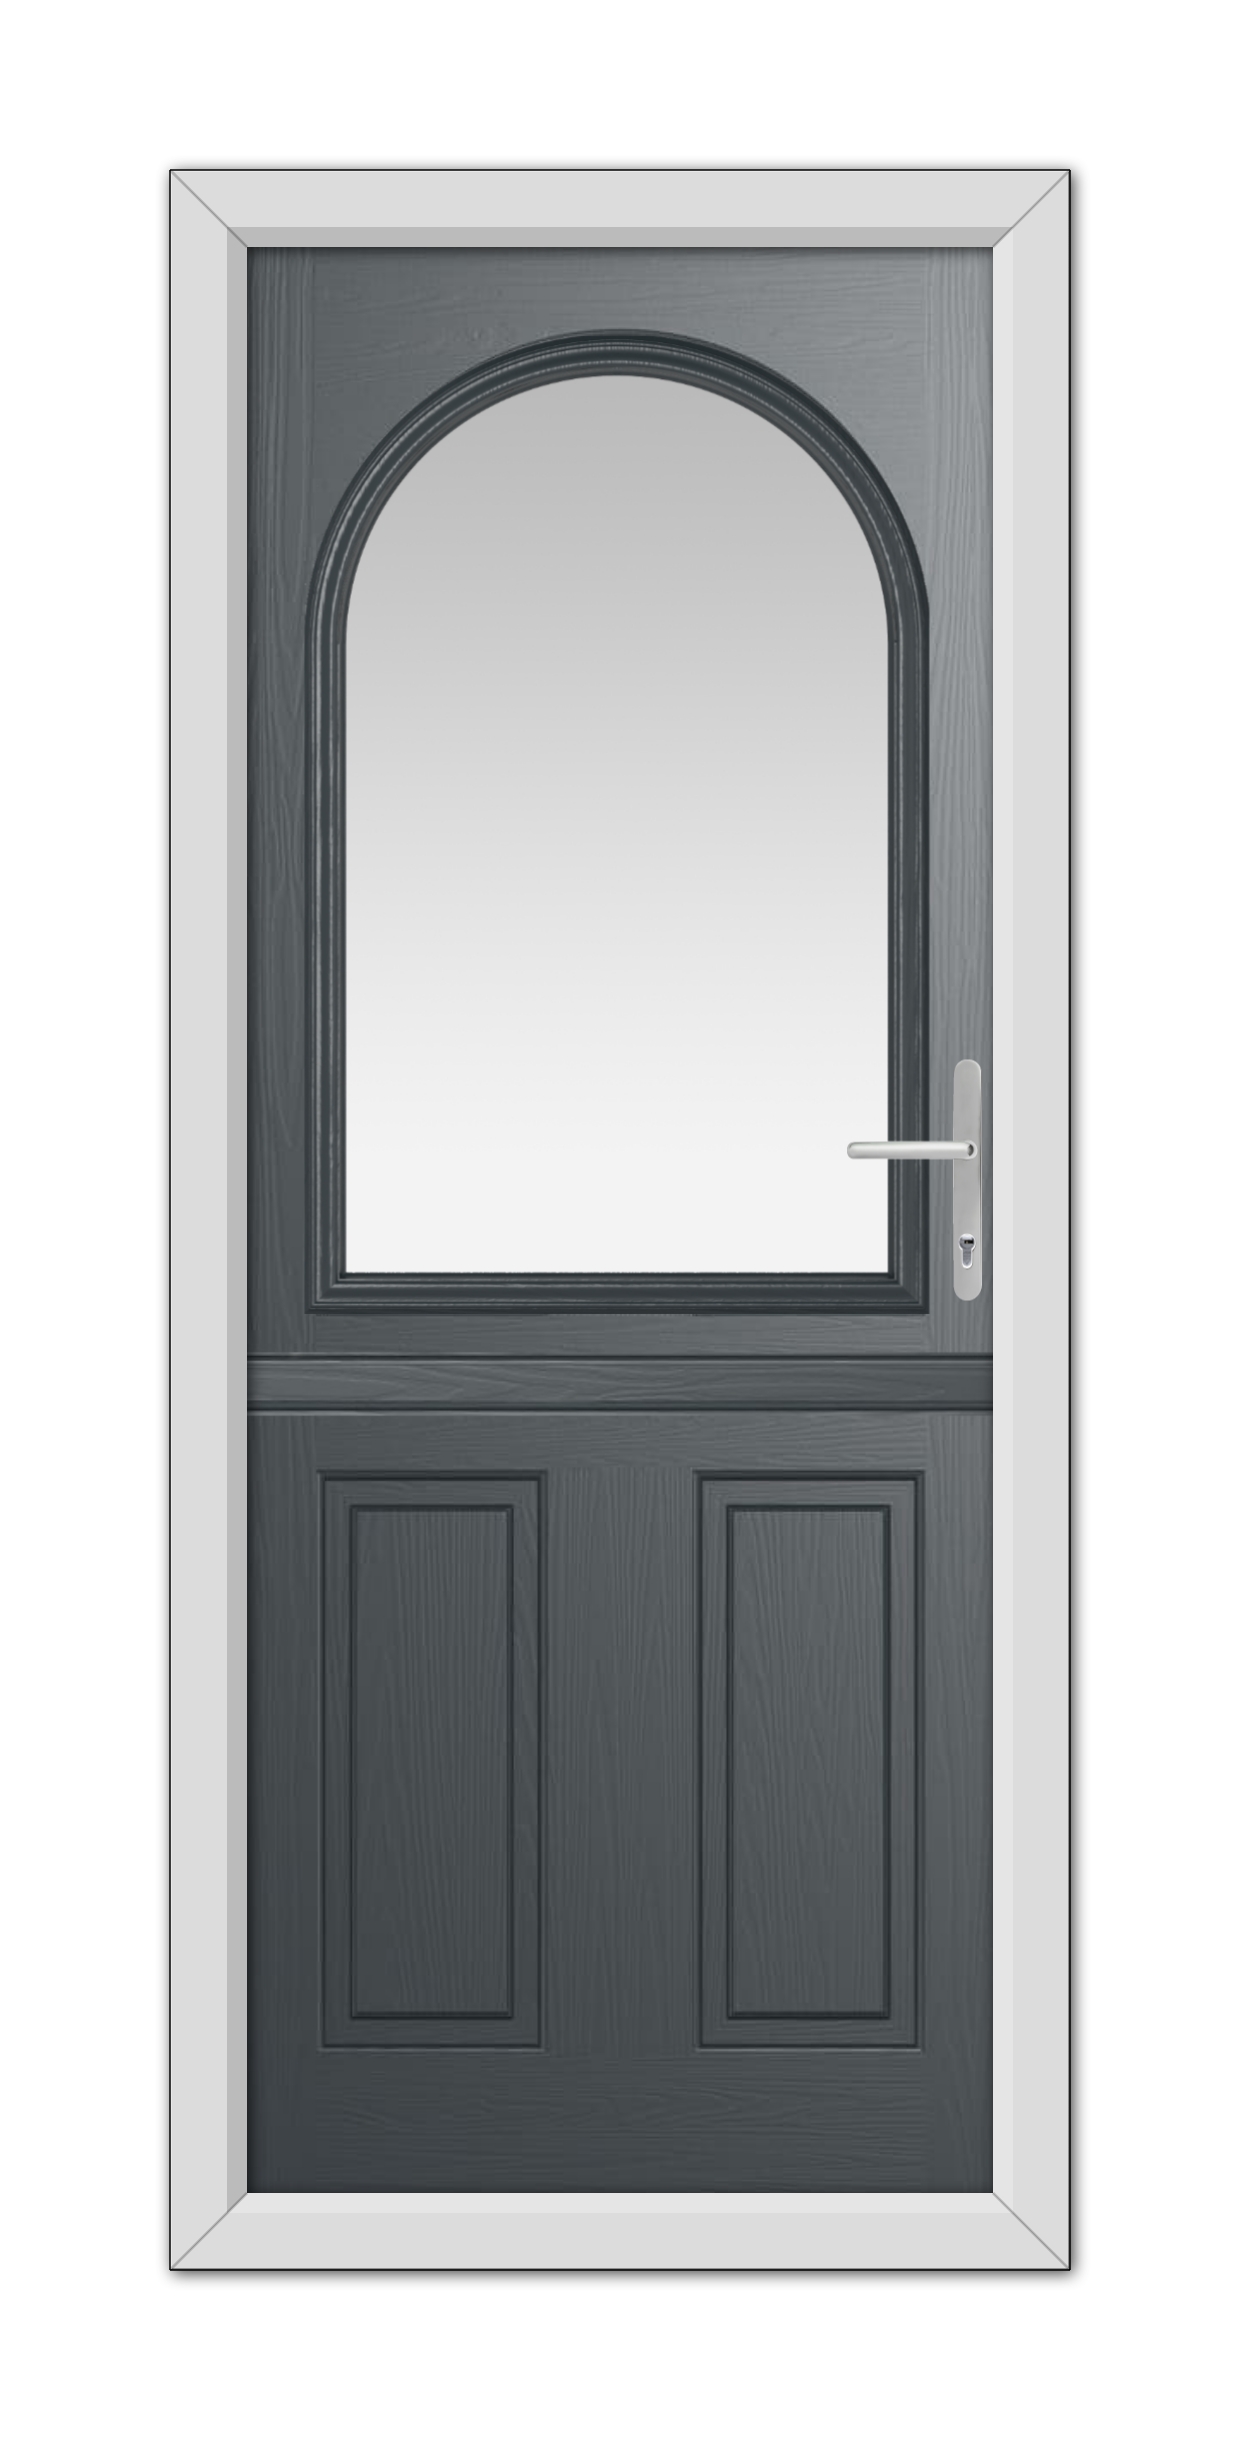 A Anthracite Grey Grafton Stable Composite Door 48mm Timber Core with a half-circle glass window at the top, framed in white, featuring a modern handle on the right side.